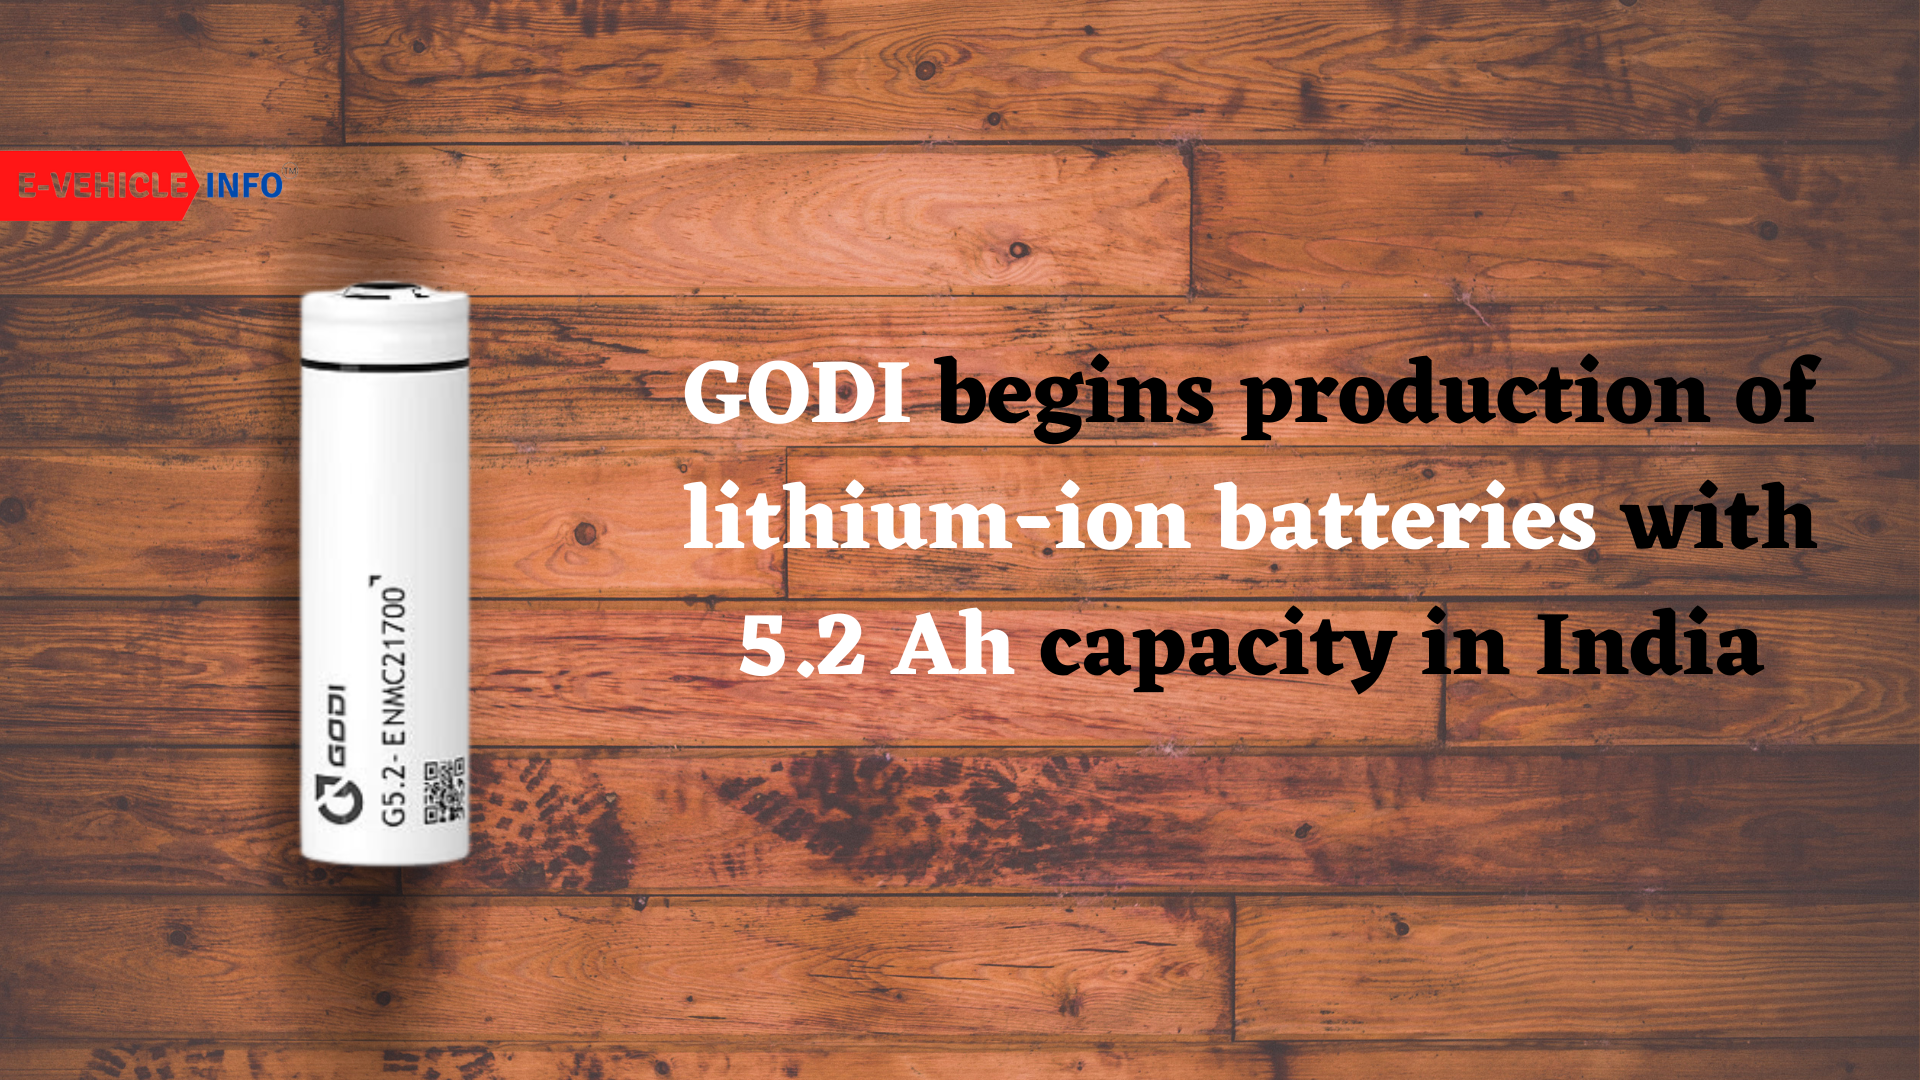 https://e-vehicleinfo.com/godi-begins-production-of-lithium-ion-batteries-with-5-2-ah-capacity-in-india/